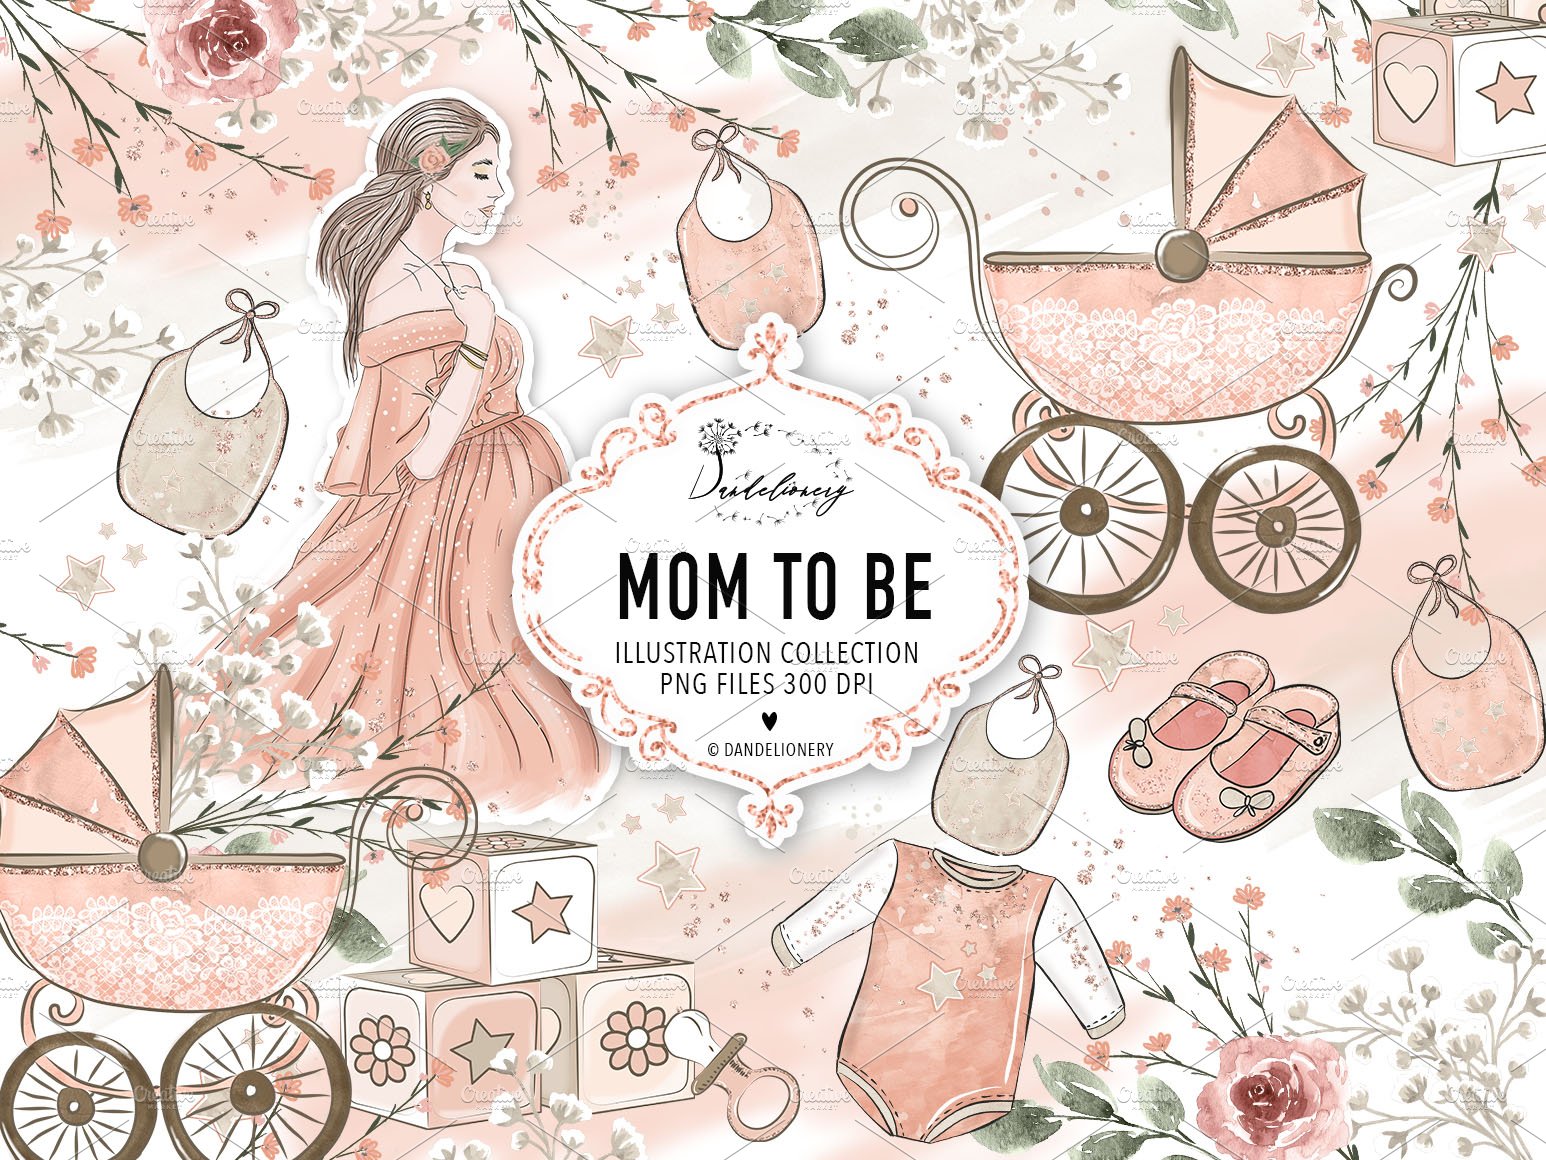 Mom to be design cover image.